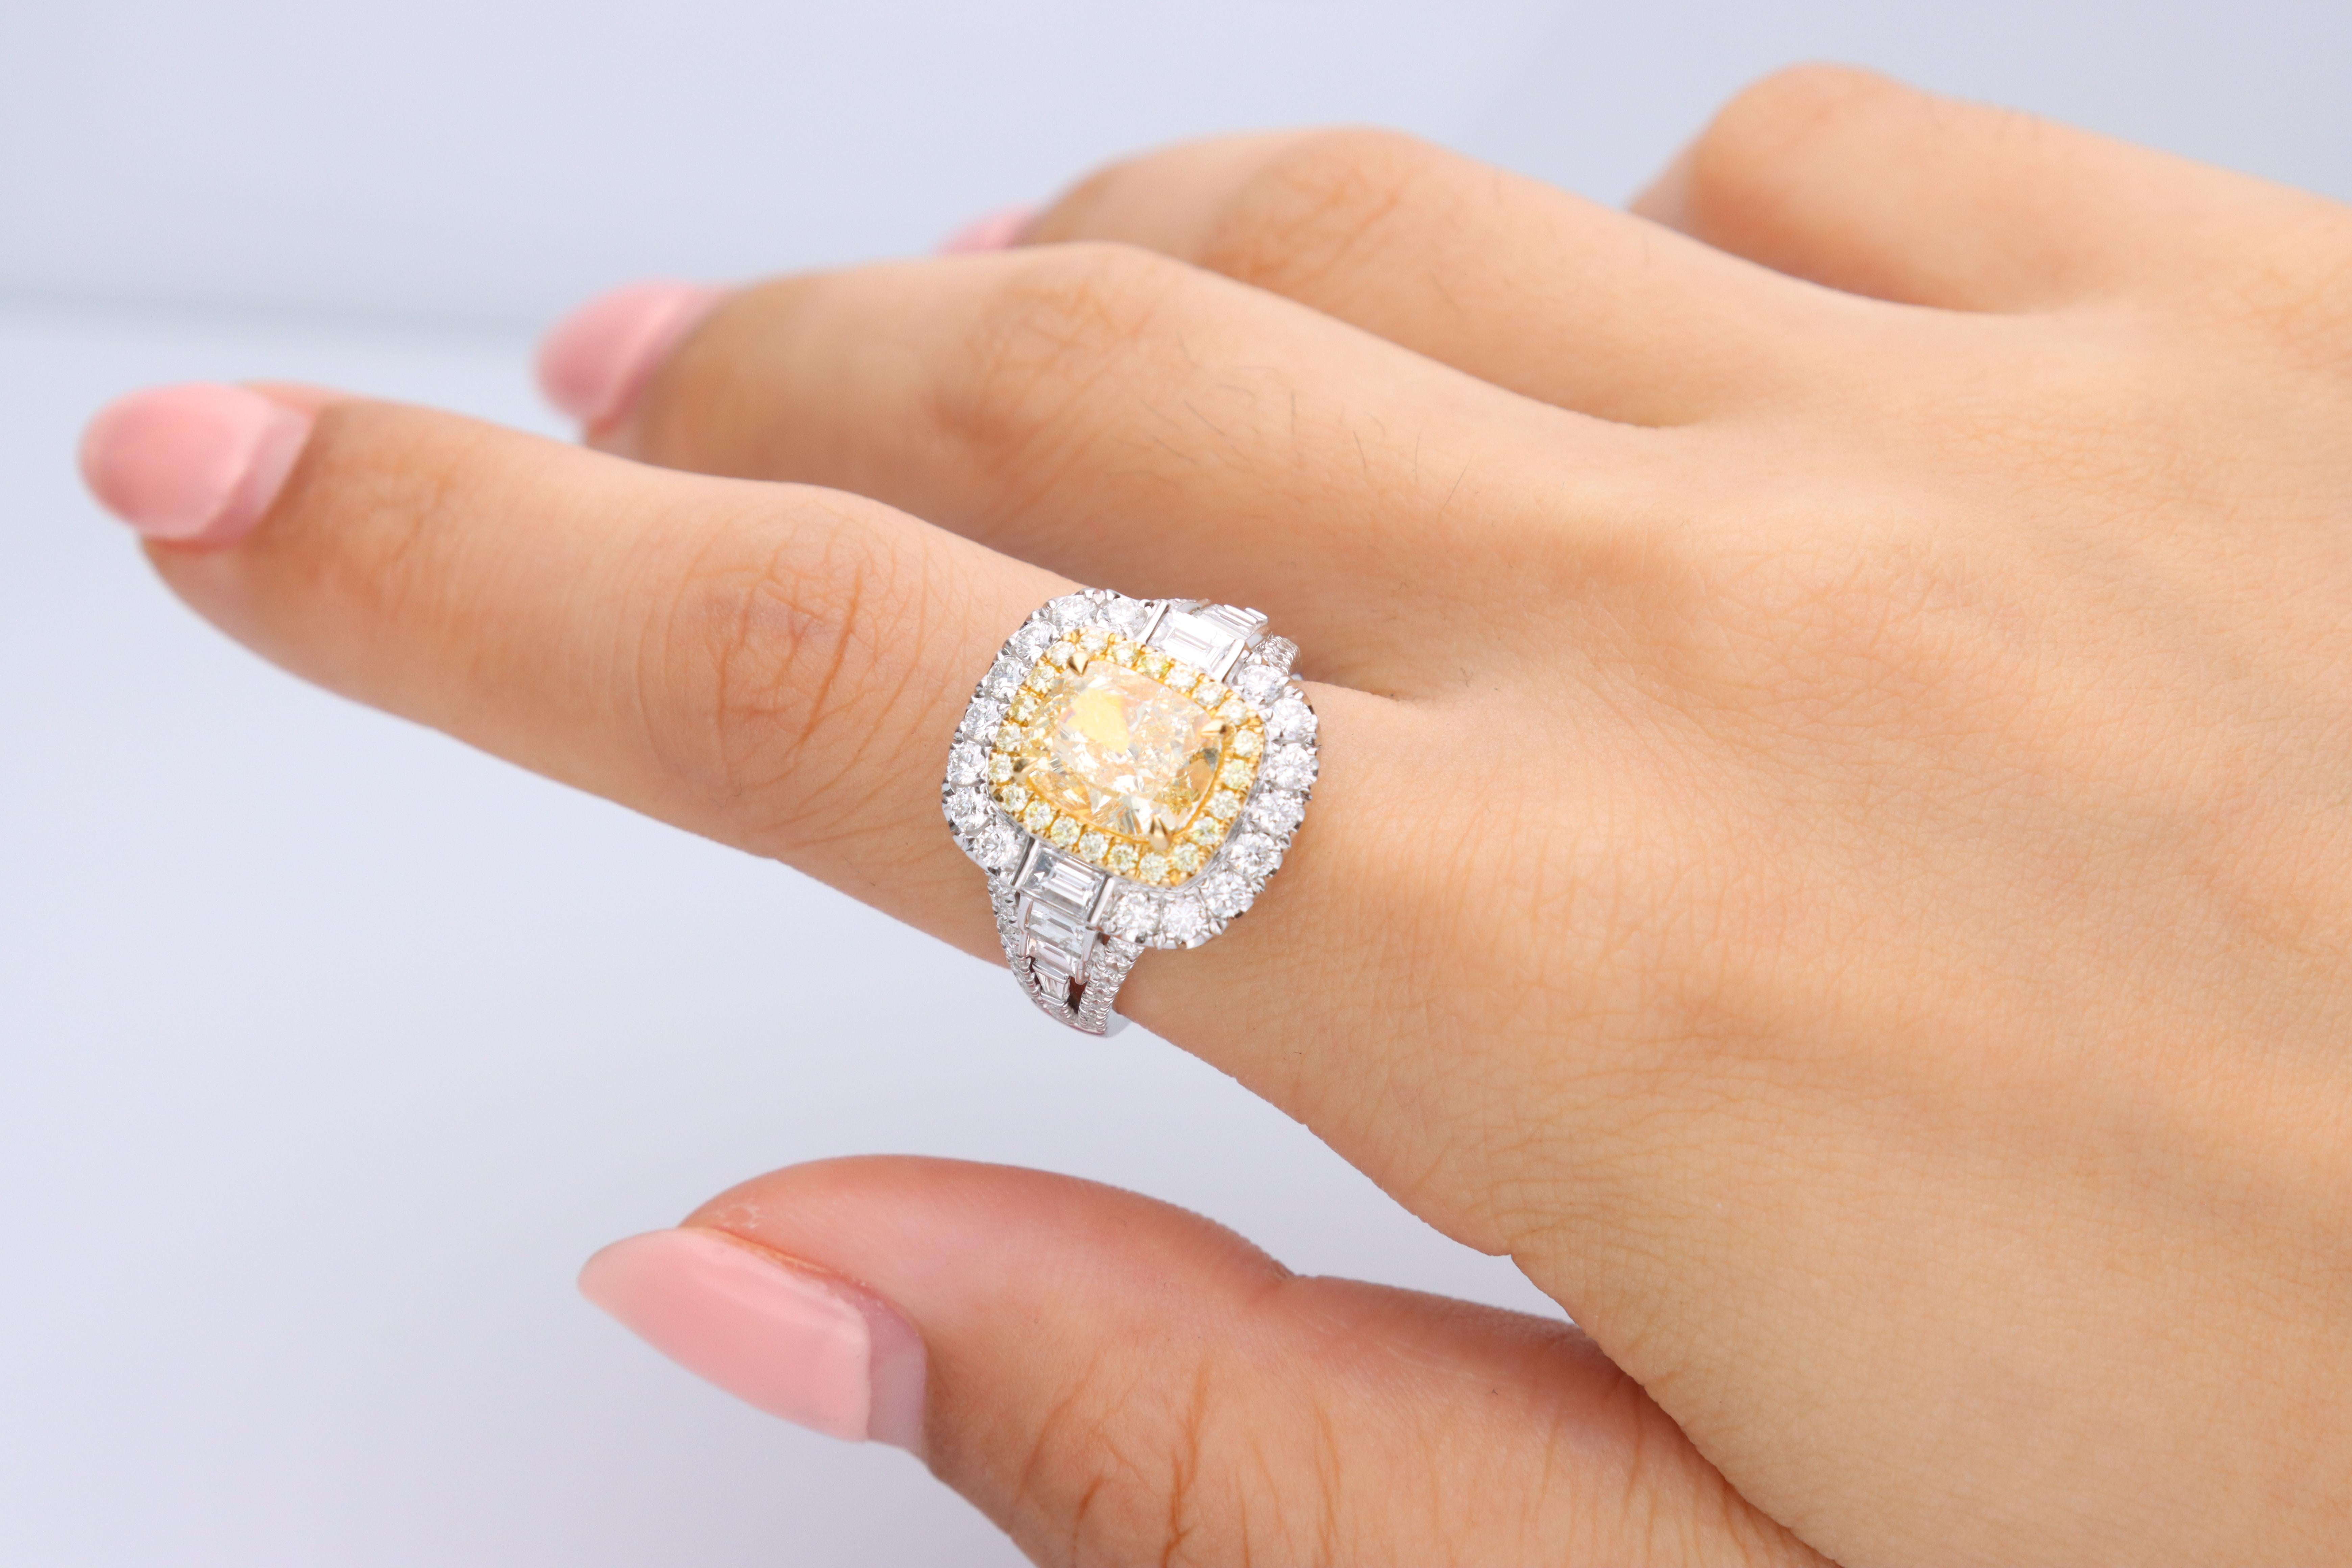 Stunning, timeless and classy eternity Unique Ring. Decorate yourself in luxury with this Gin & Grace Ring. The 18K Two Tone Gold jewelry boasts with Cushion-cut 1 pcs 3.01 carat, Round-cut 22 pcs 0.21 carat Yellow Diamond and Natural Round-cut